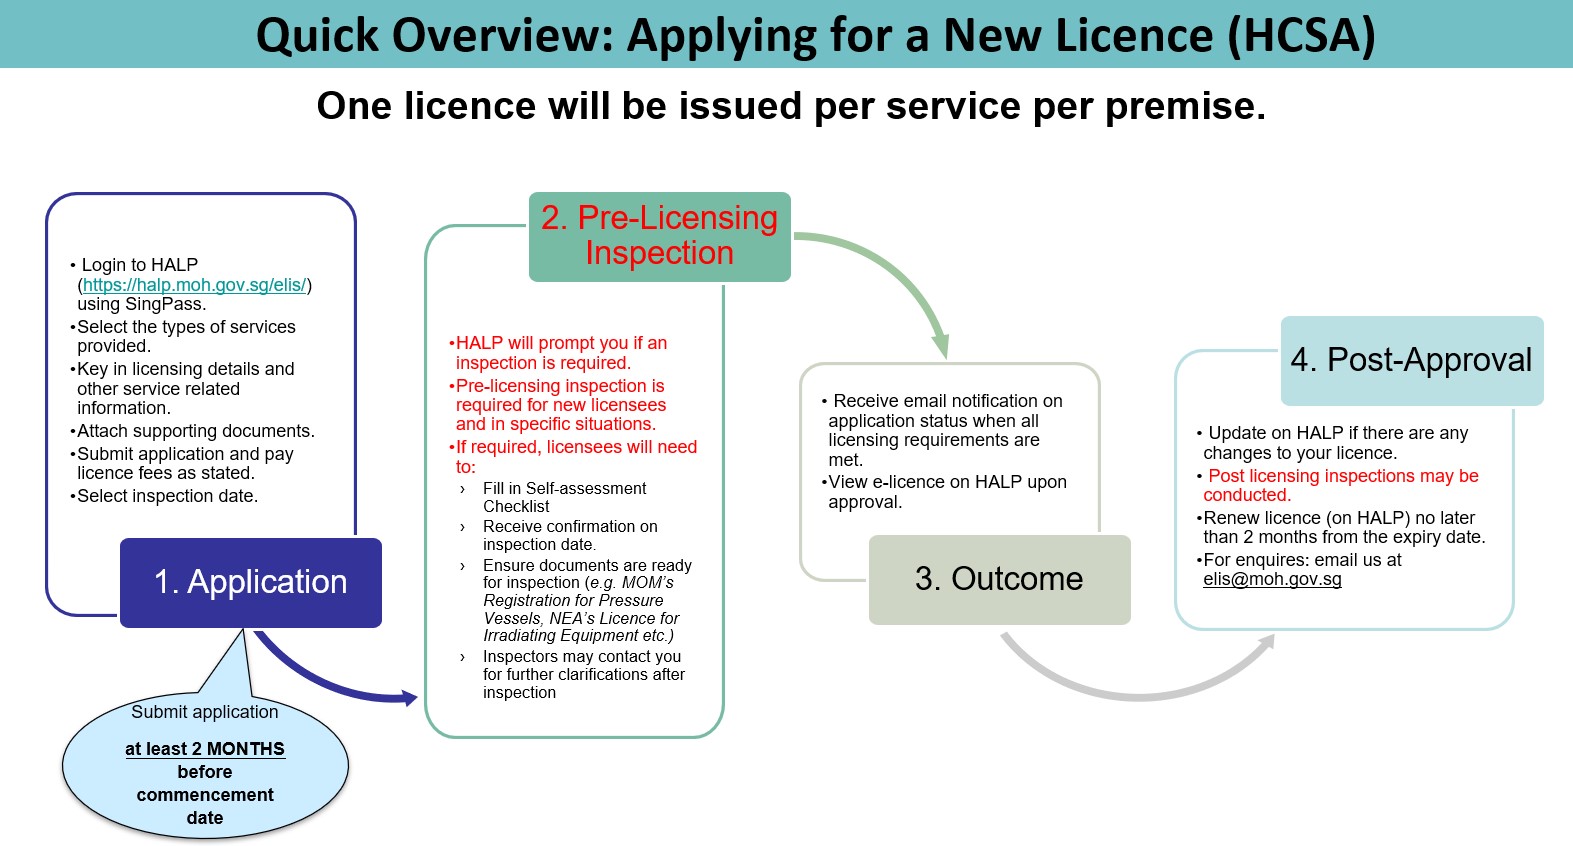 Applying for a New Licence (HCSA)